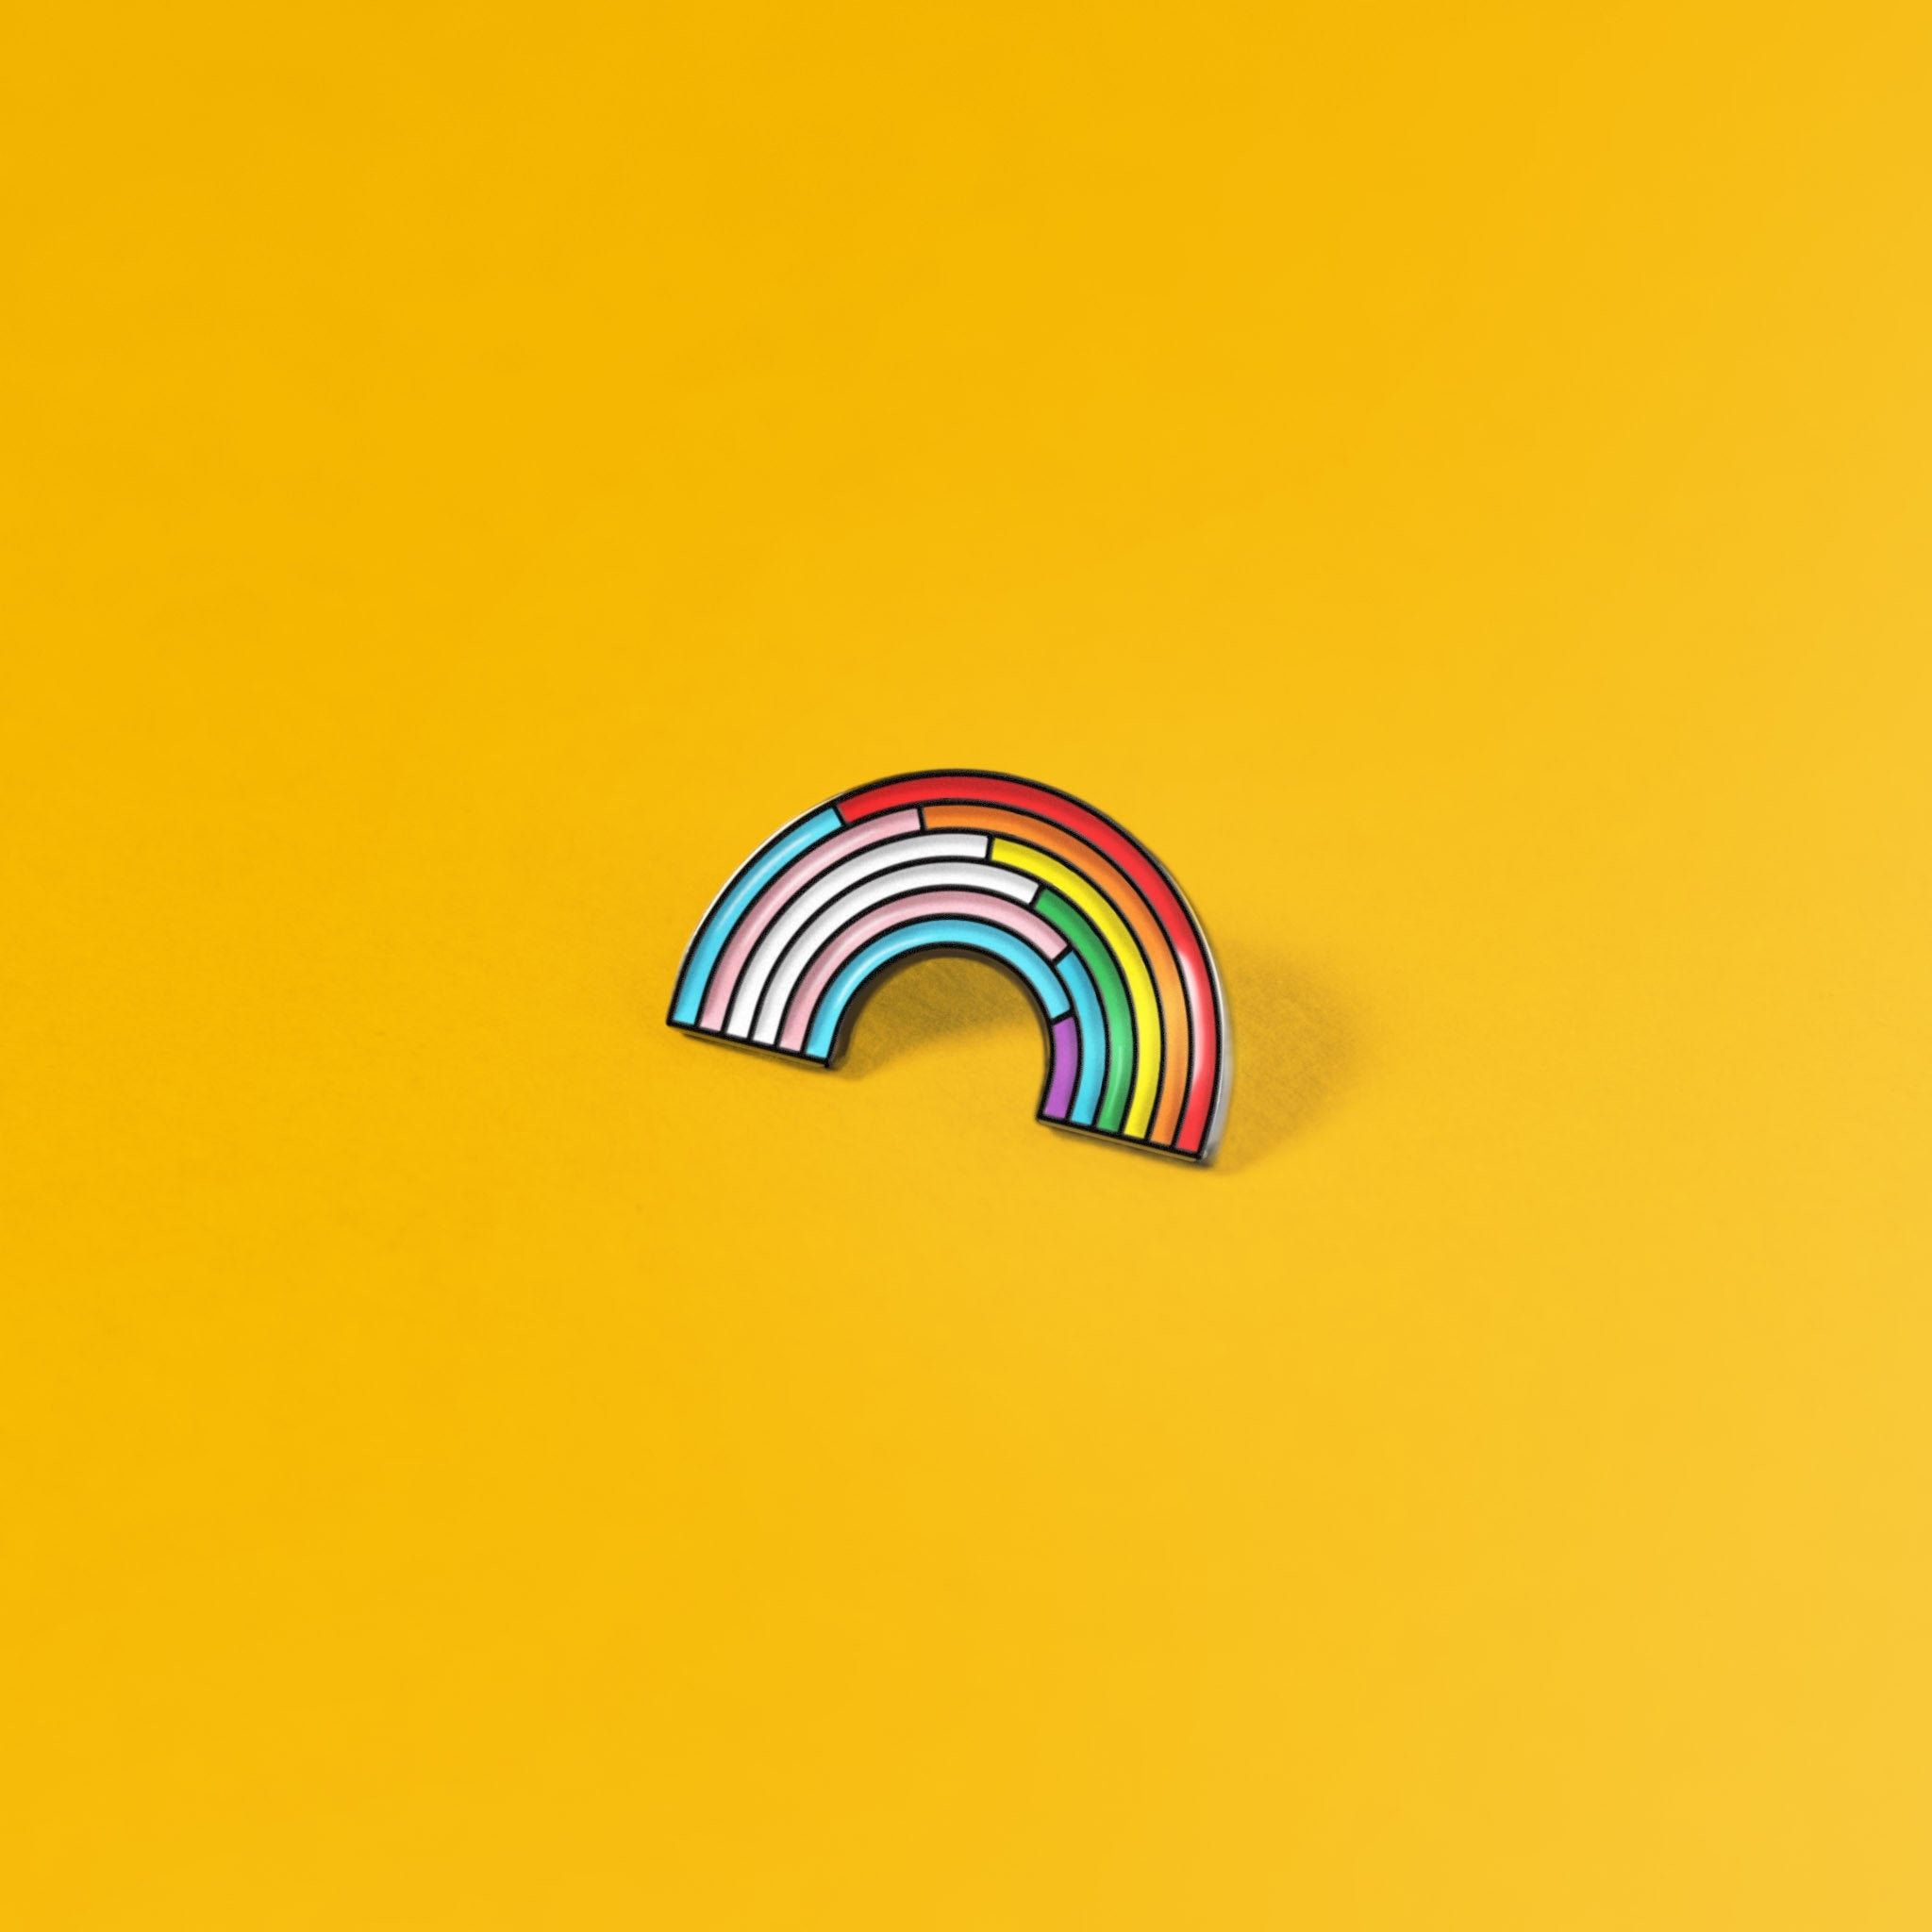 A rainbow shaped enamel pin on a yellow background - Gay, pride